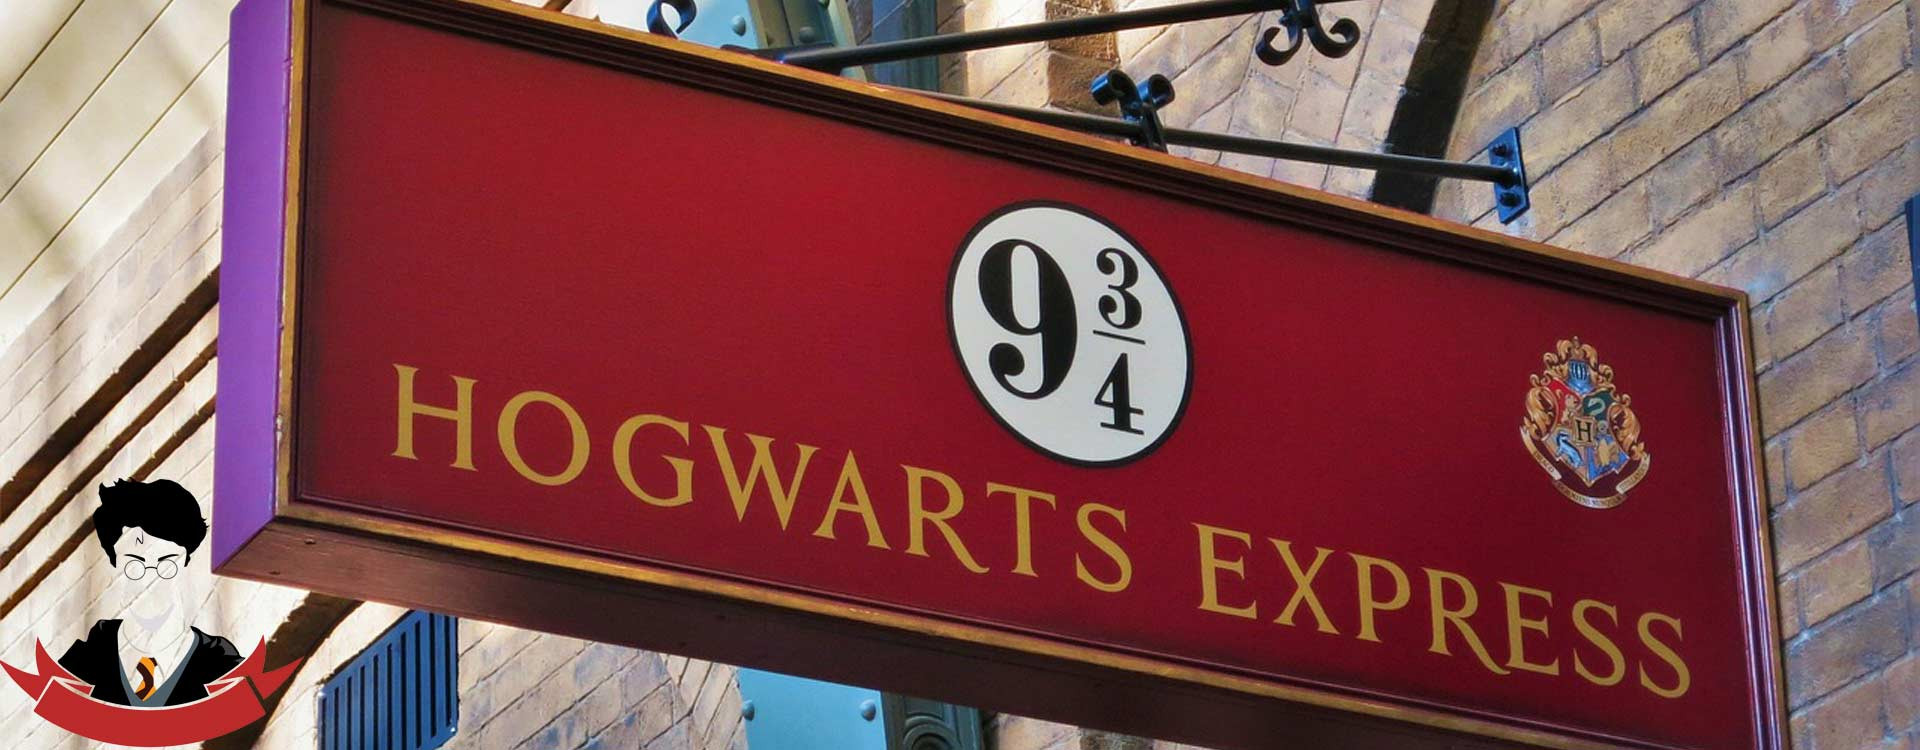 21 Harry Potter School Supplies That Will Make You A Total Hermione